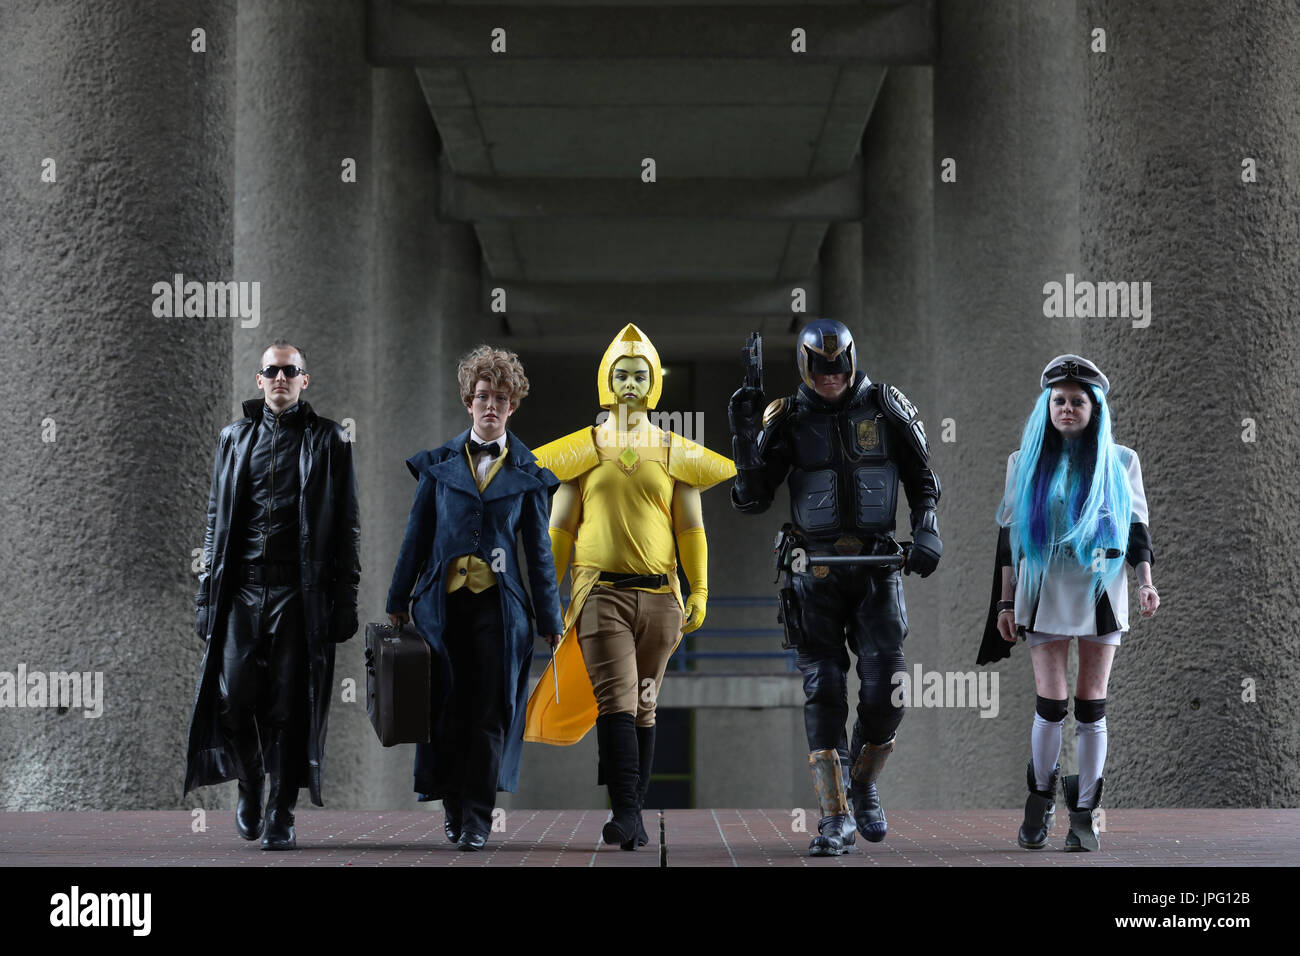 London, UK. 2nd Aug, 2017. Cosplayers pose as (L-R) Albert Wesker from Resident Evil, Newt Scamander from the Harry Potter franchise, Yellow Diamond from the Steven Universe, Judge Enza, a character based on the Judge Dredd franchise, and Esdeath from the anime Akame Ga Kill! respectively, during a photocall for the 'Into the Unknown : A Journey through Science Fiction' exhibition at the Barbican Centre in London, UK, Wednesday August 2, 2017. Credit: Luke MacGregor/Alamy Live News Stock Photo